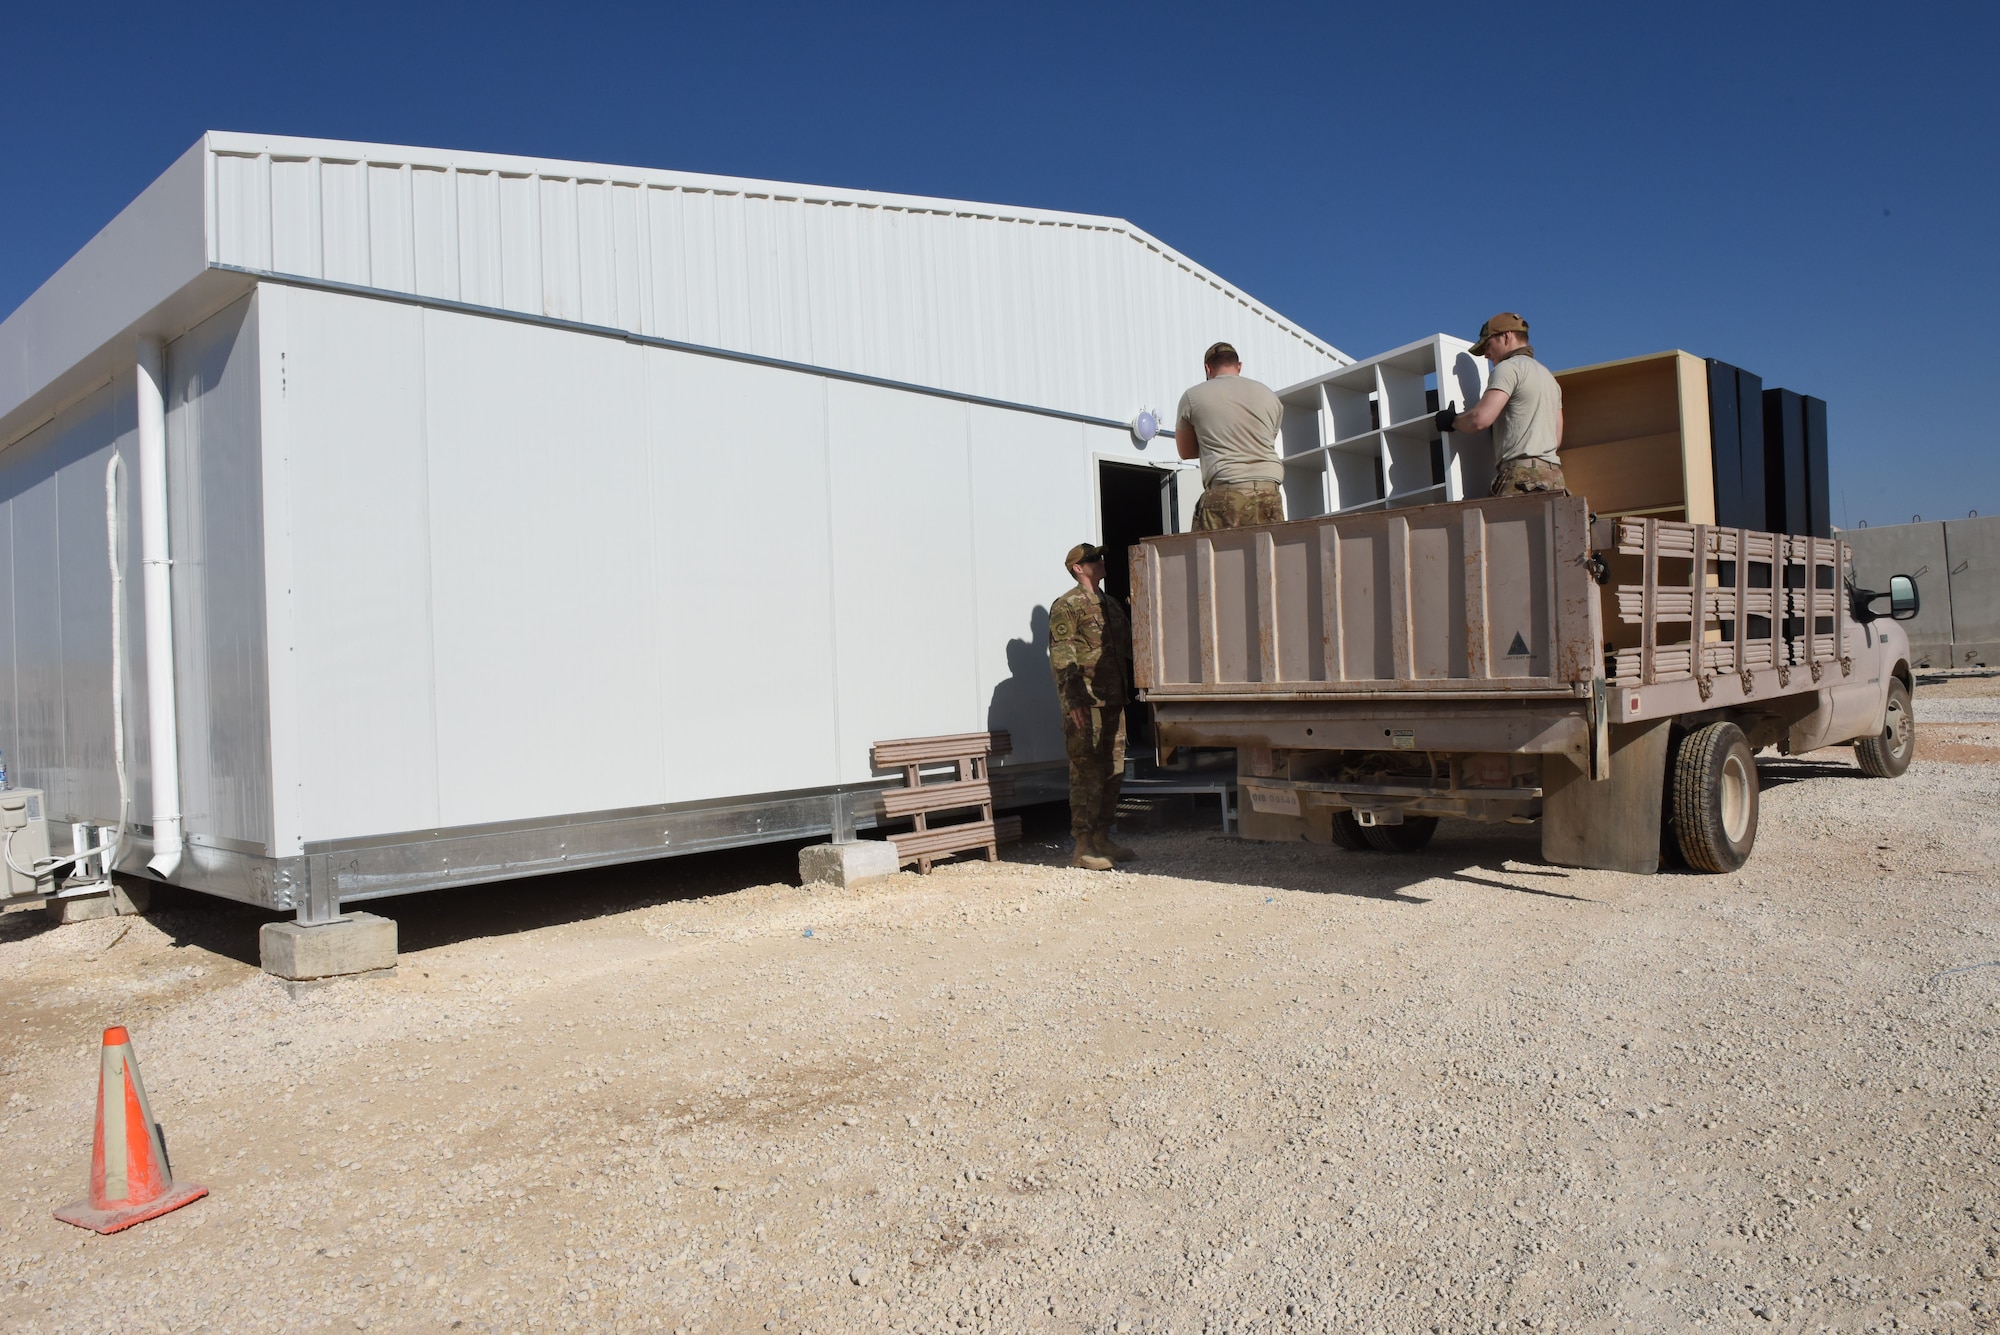 Airmen assigned to 332nd Civil Engineer Force Protection section move furniture into the new Oasis Recreation Center Jan. 18, 2018. With the help of the 332nd Contracting Squadron, the recreation center was able to upgrade to a modular building in place of a tent. (U.S. Air Force photo by Staff Sgt. Antonio Gonzalez/Released)